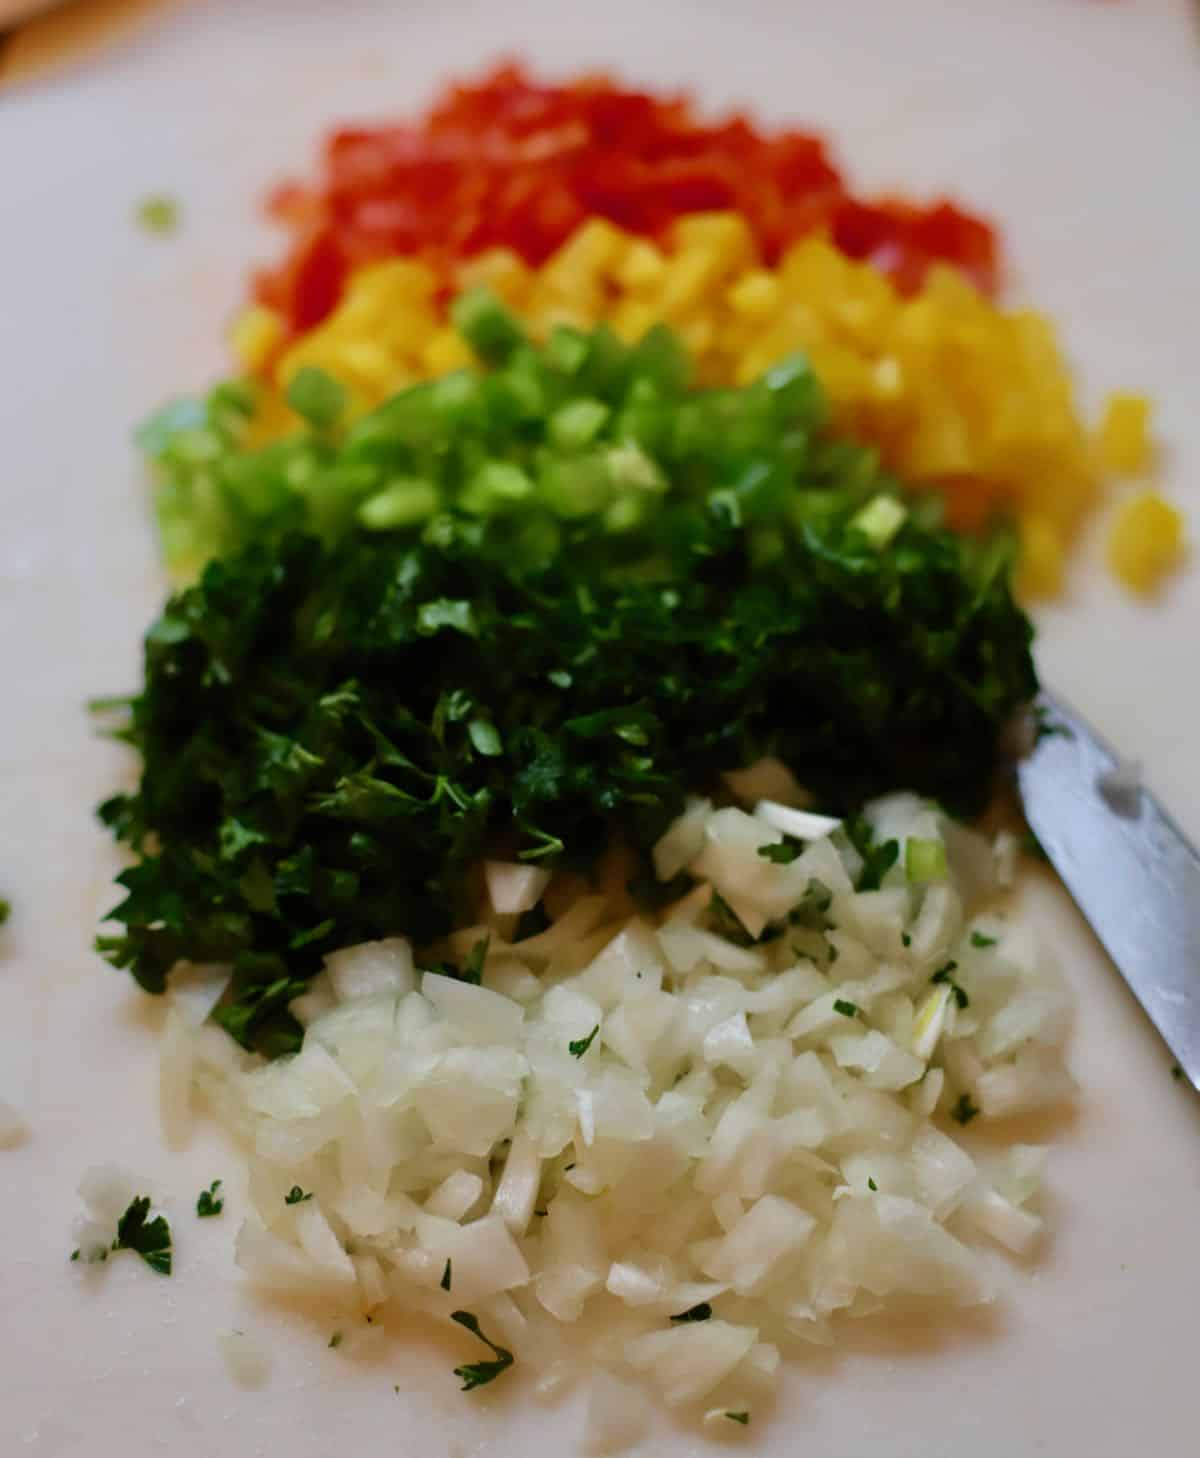 Chopped veggies including onion and bell peppers.